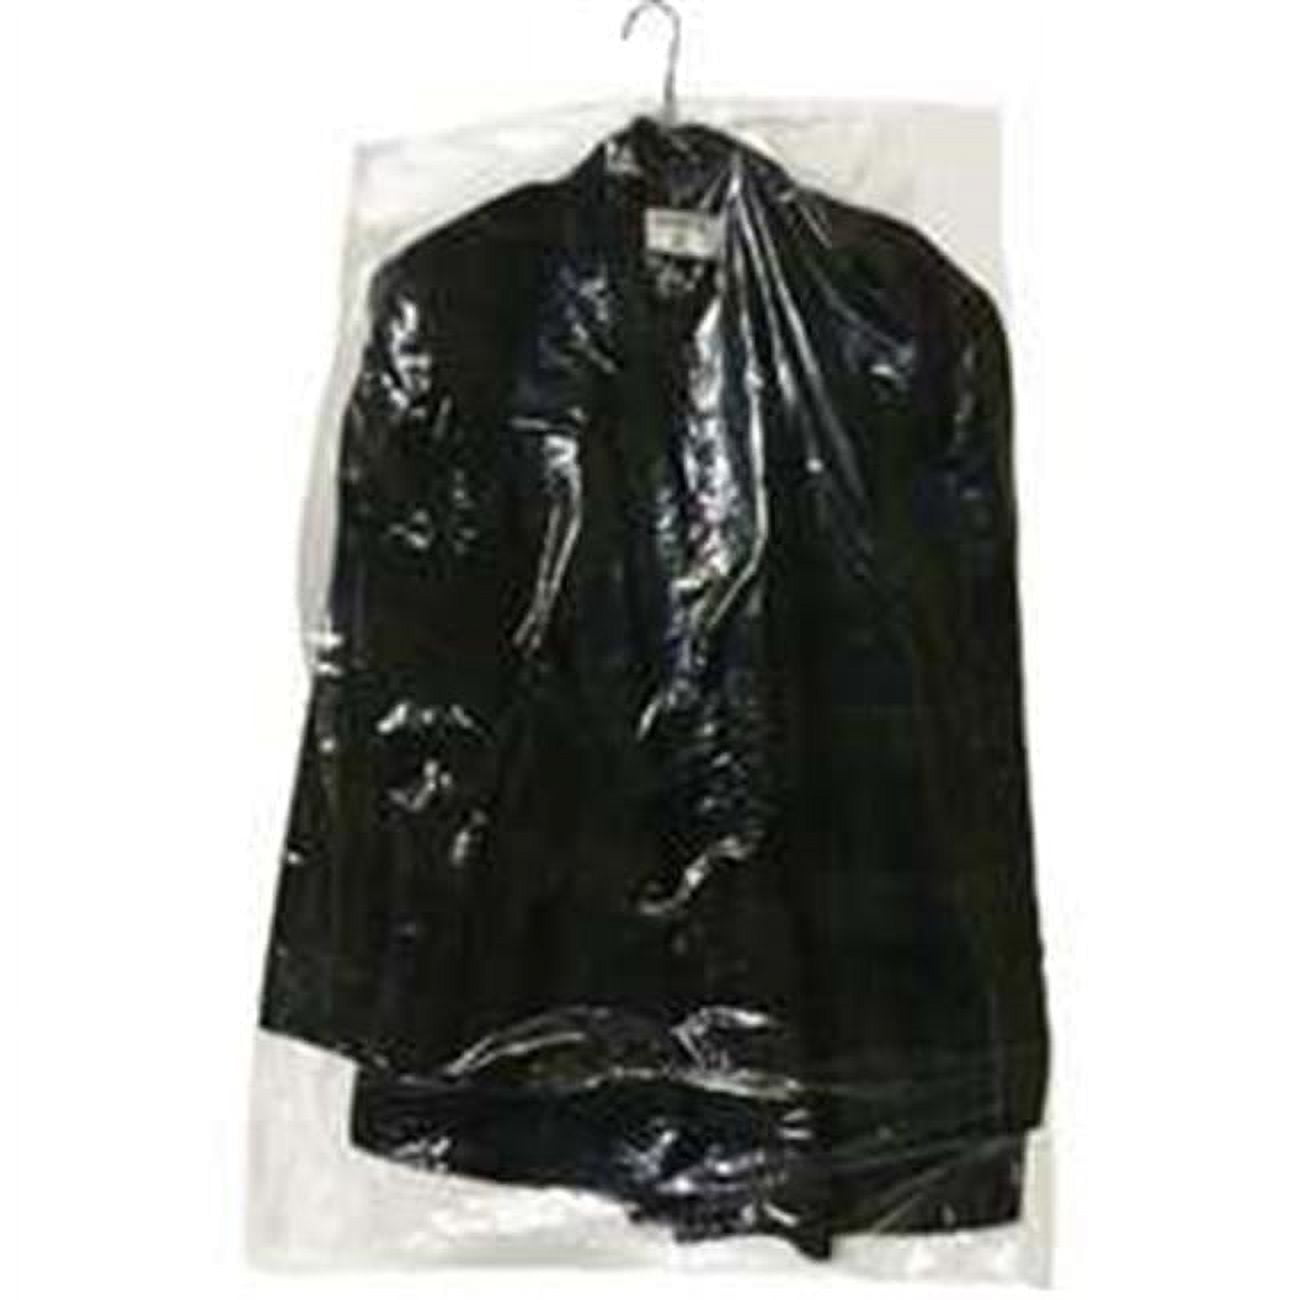 Gb21454 21 X 4 X 54 In. 0.6 Mil Garment Bags, Clear - Case Of 360